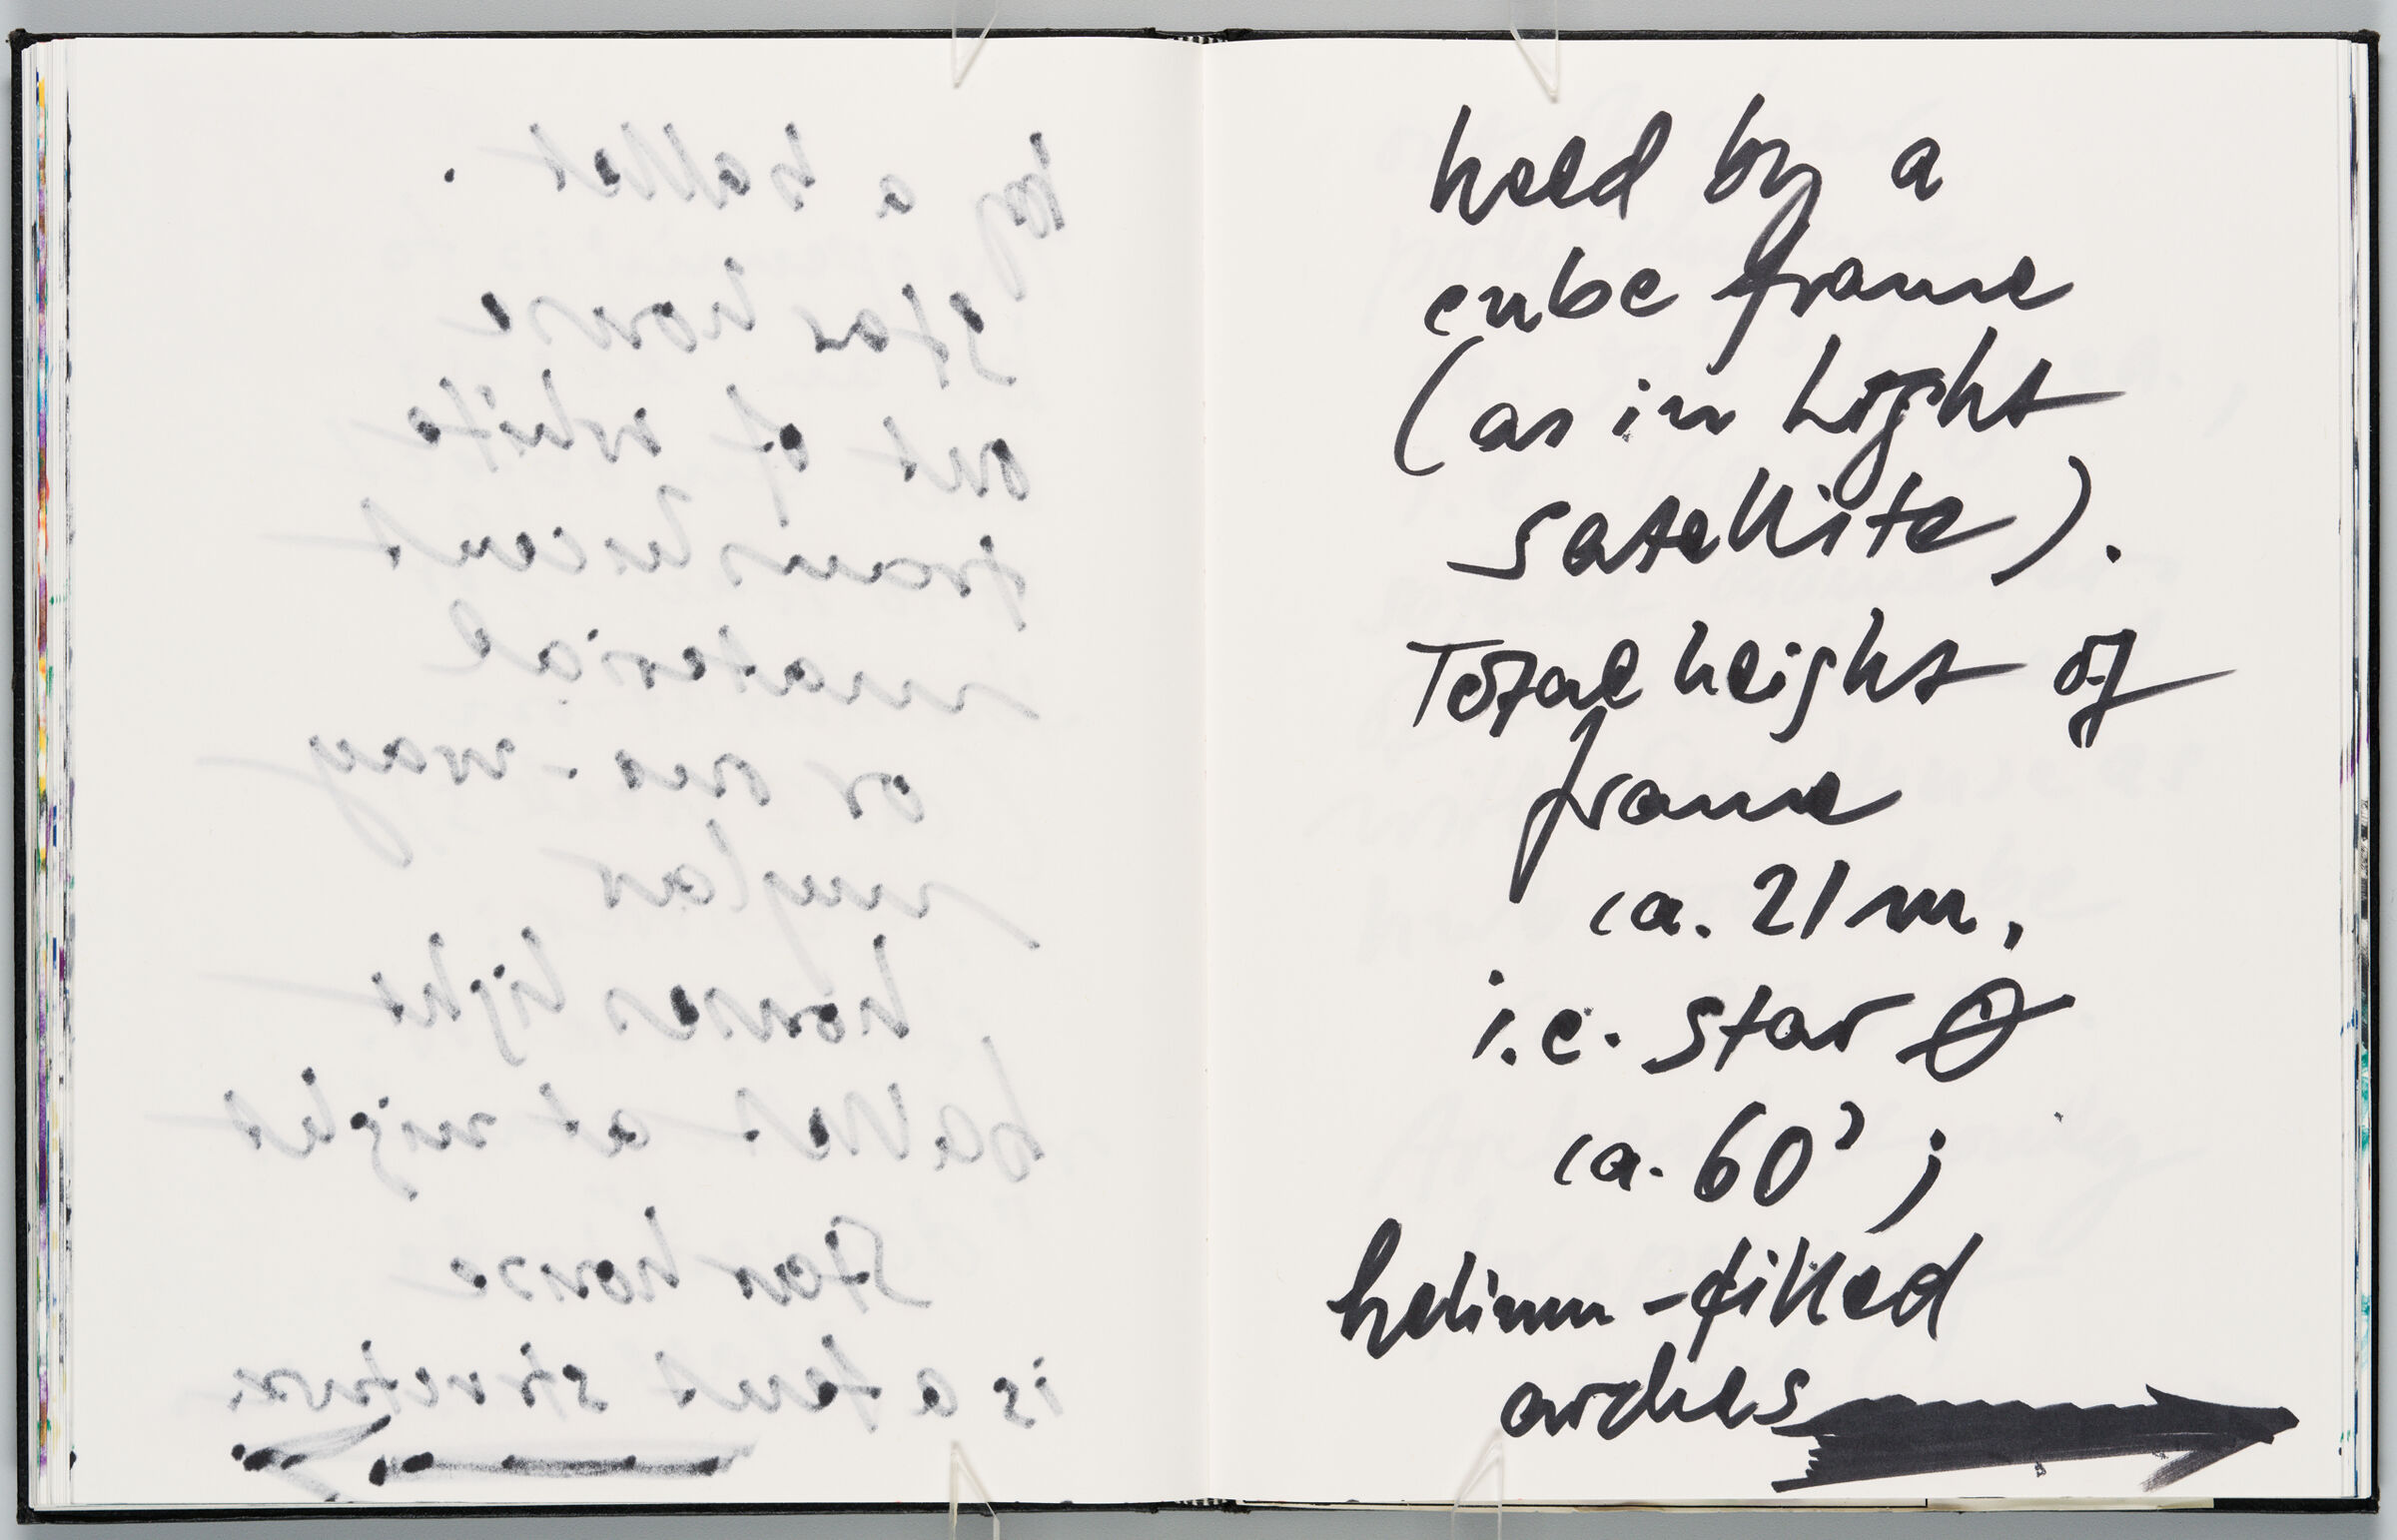 Untitled (Bleed-Through Of Previous Page, Left Page); Untitled (Notes, Right Page)